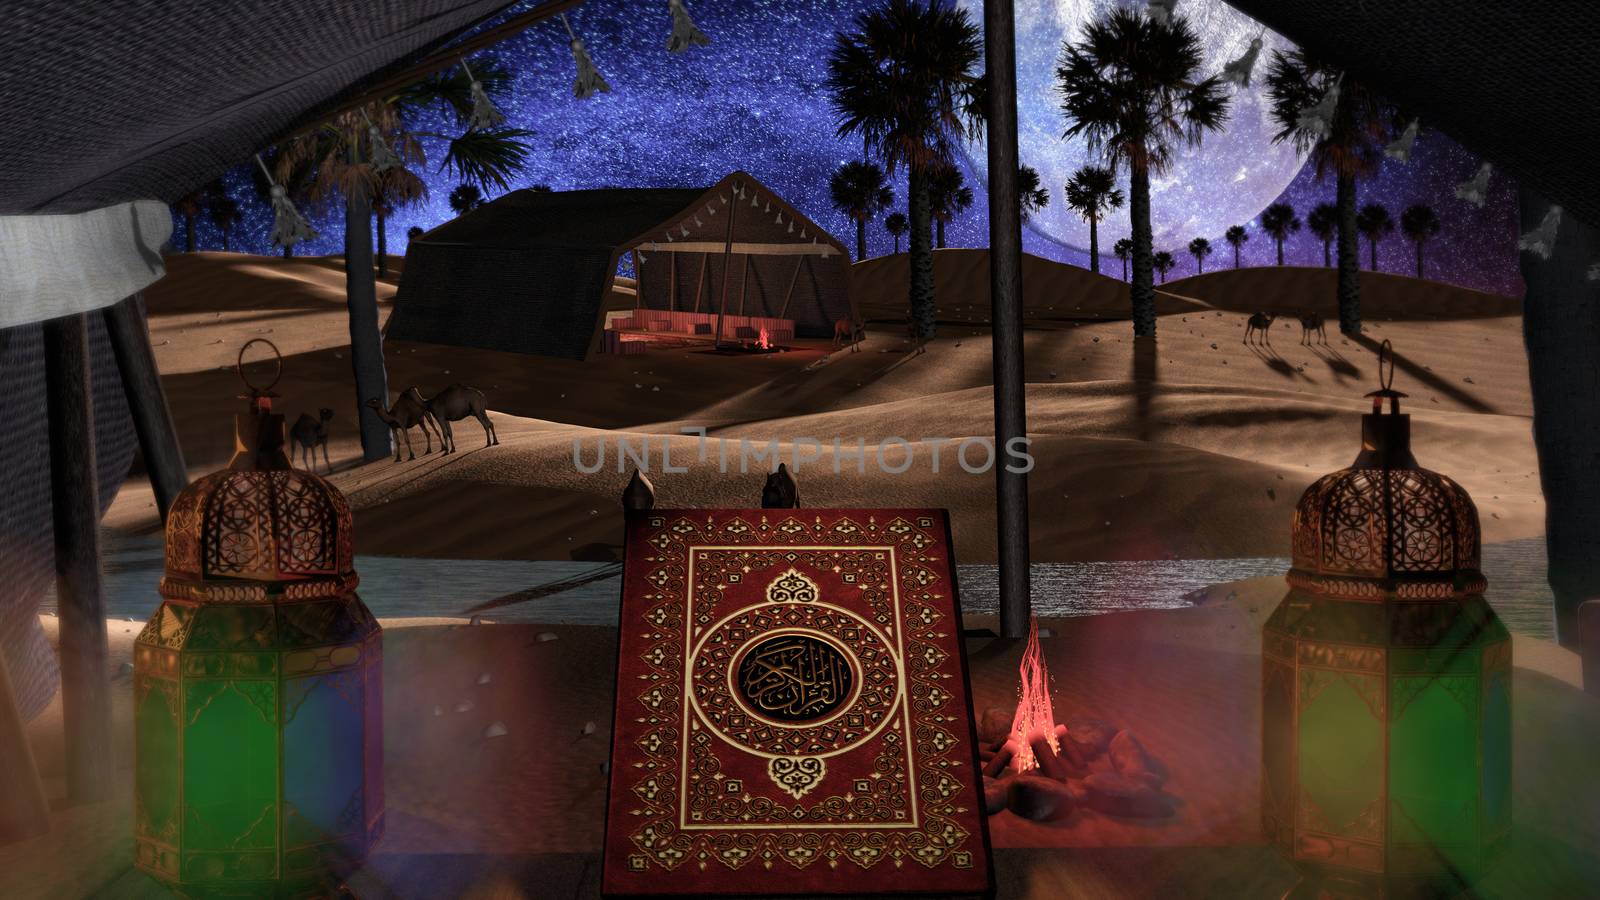 Eid Mubarak 3d illustration with wonderful scene elements as camels, fire palm trees and other detailed objects